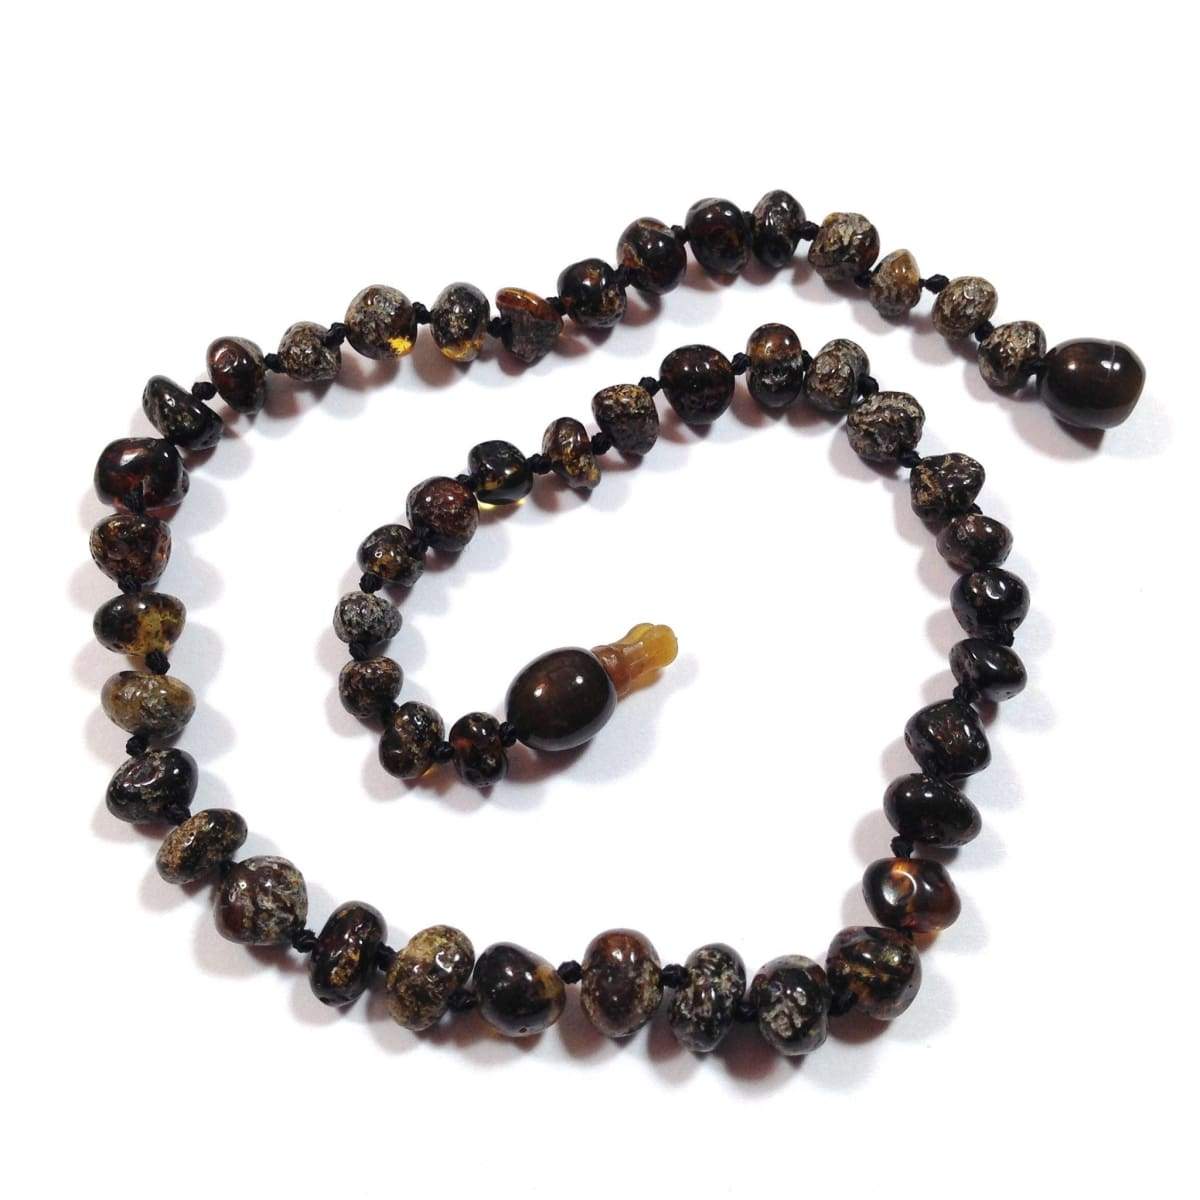 BALTIC AMBER NECKLACE, Rounded Raw Black Amber, Necklace Various Length  15-26 in | eBay